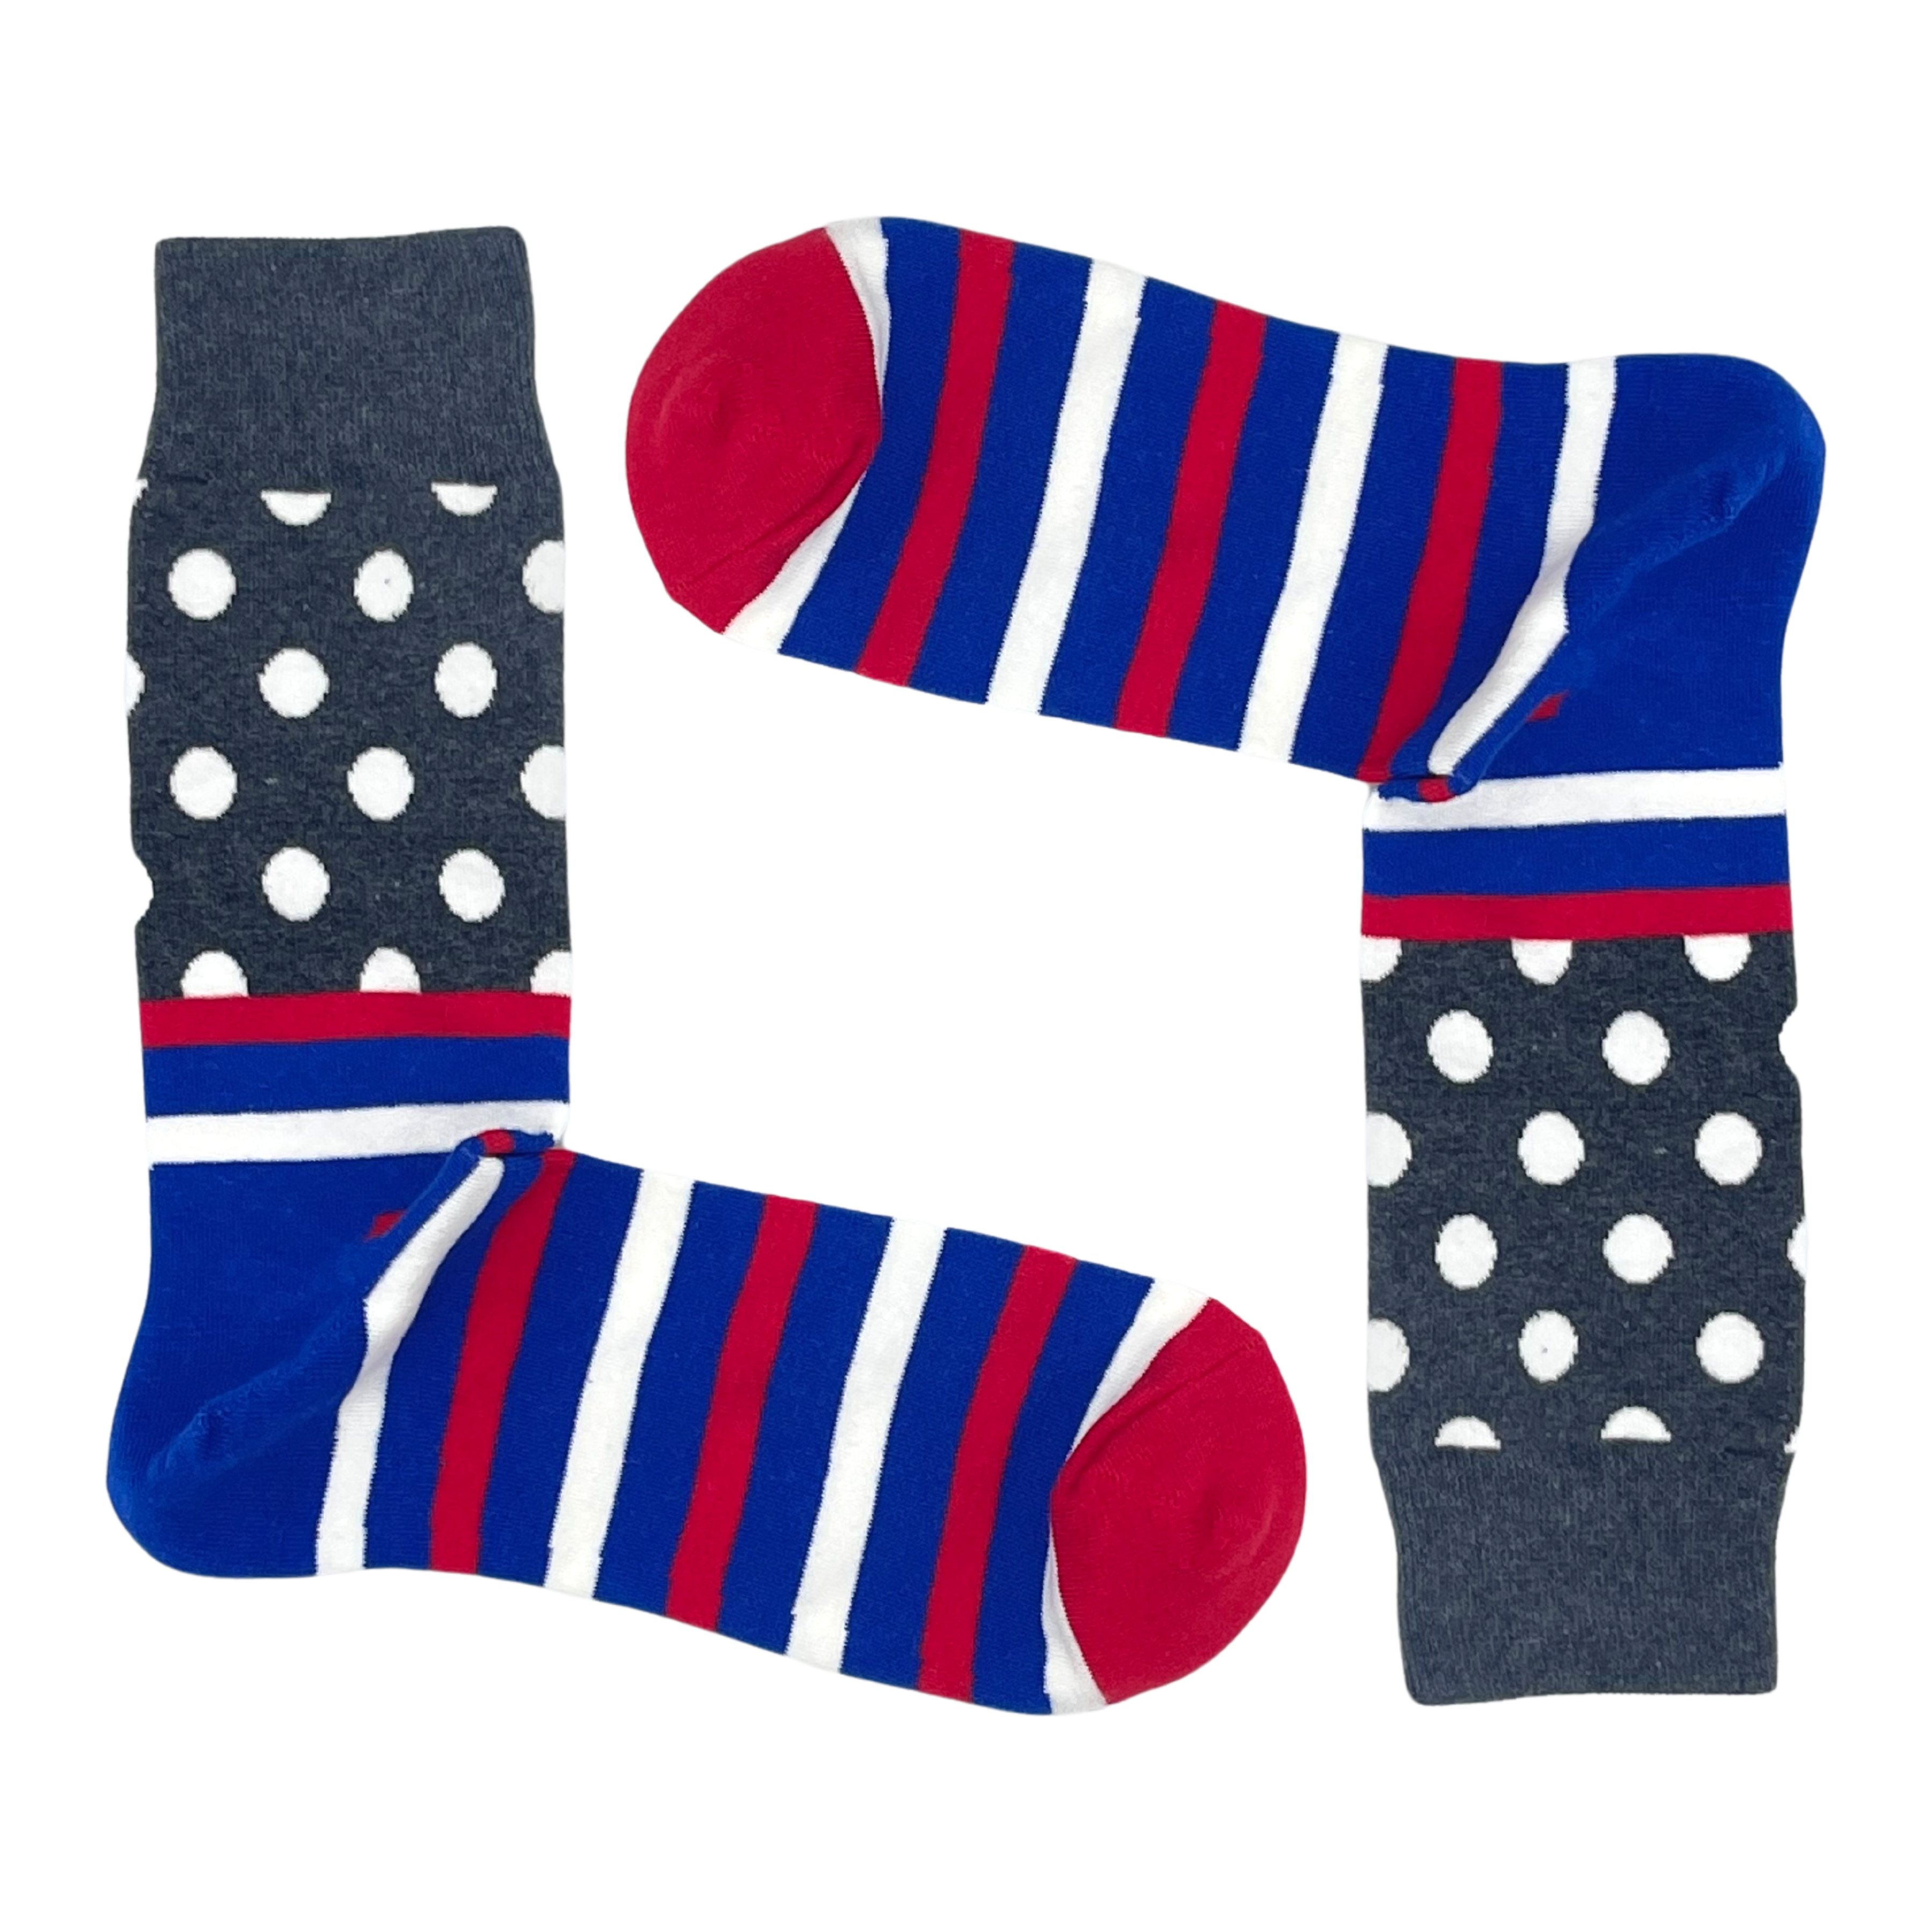 STRIPES & DOTS- GRAY, RED, BLUE